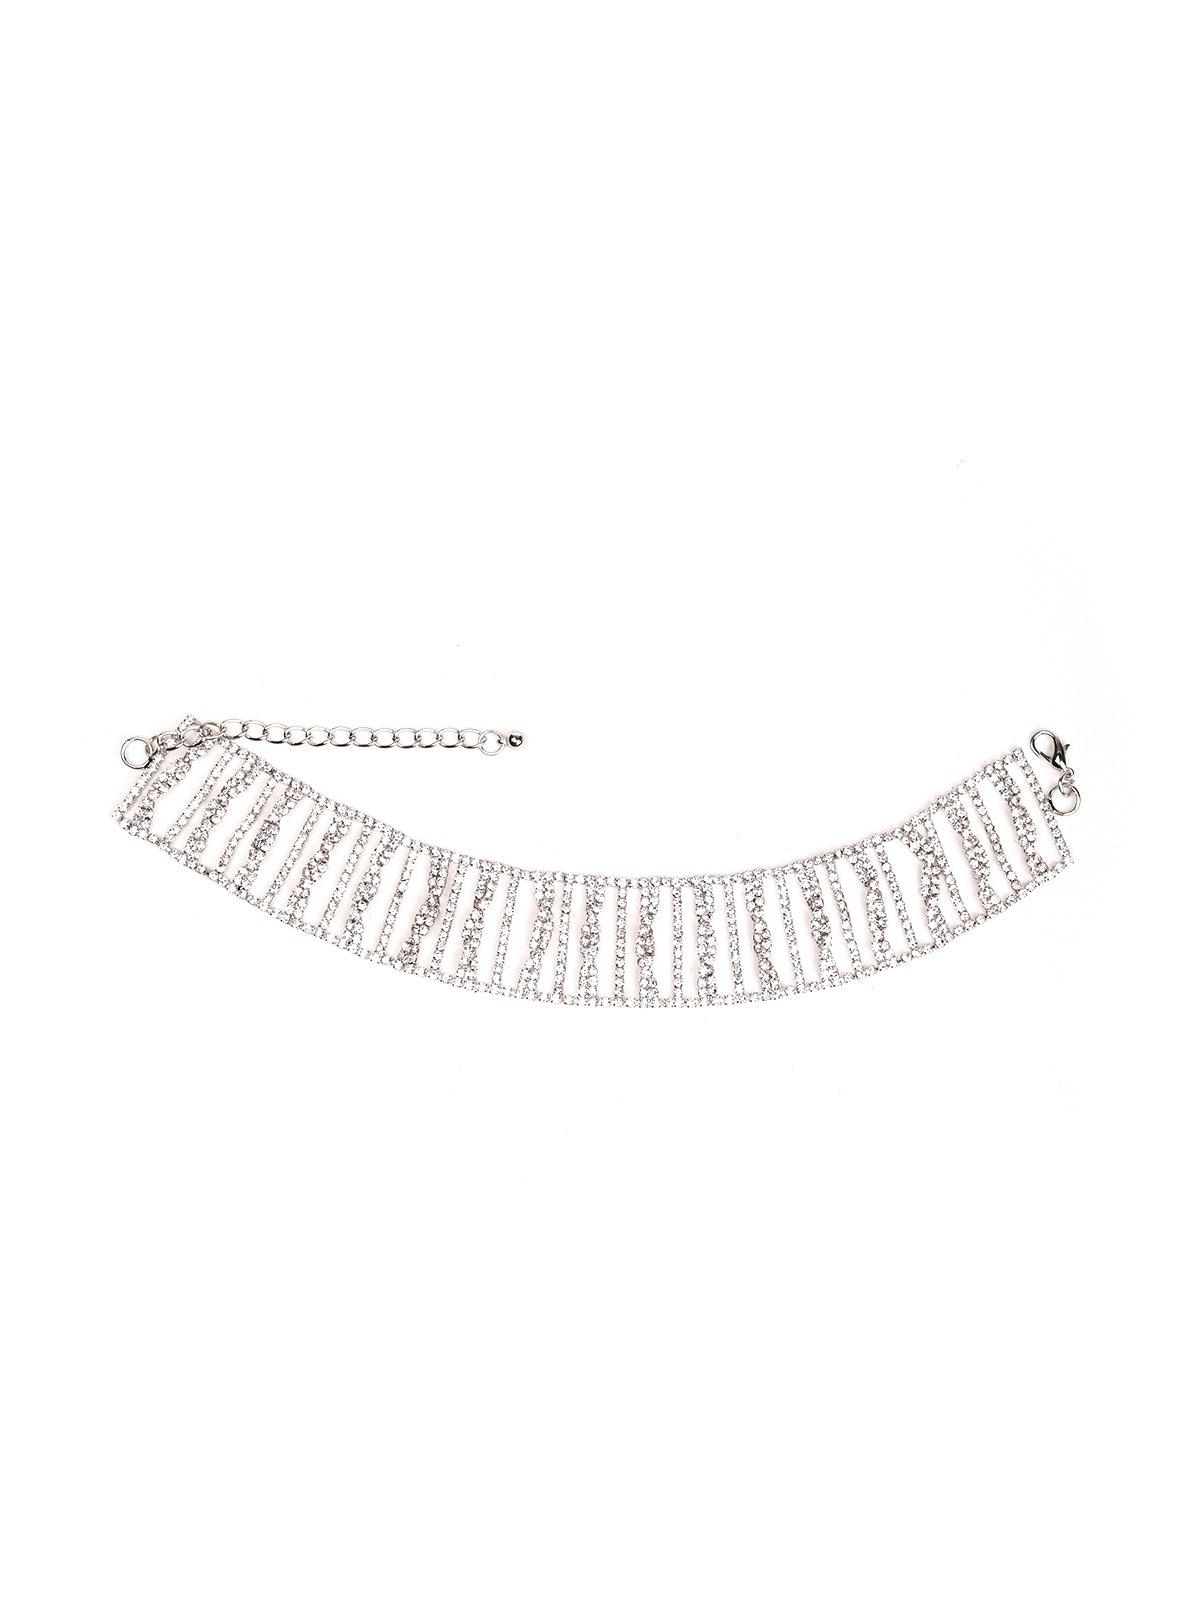 Women's Exquisite Crystal Lined Choker -Silver - Odette